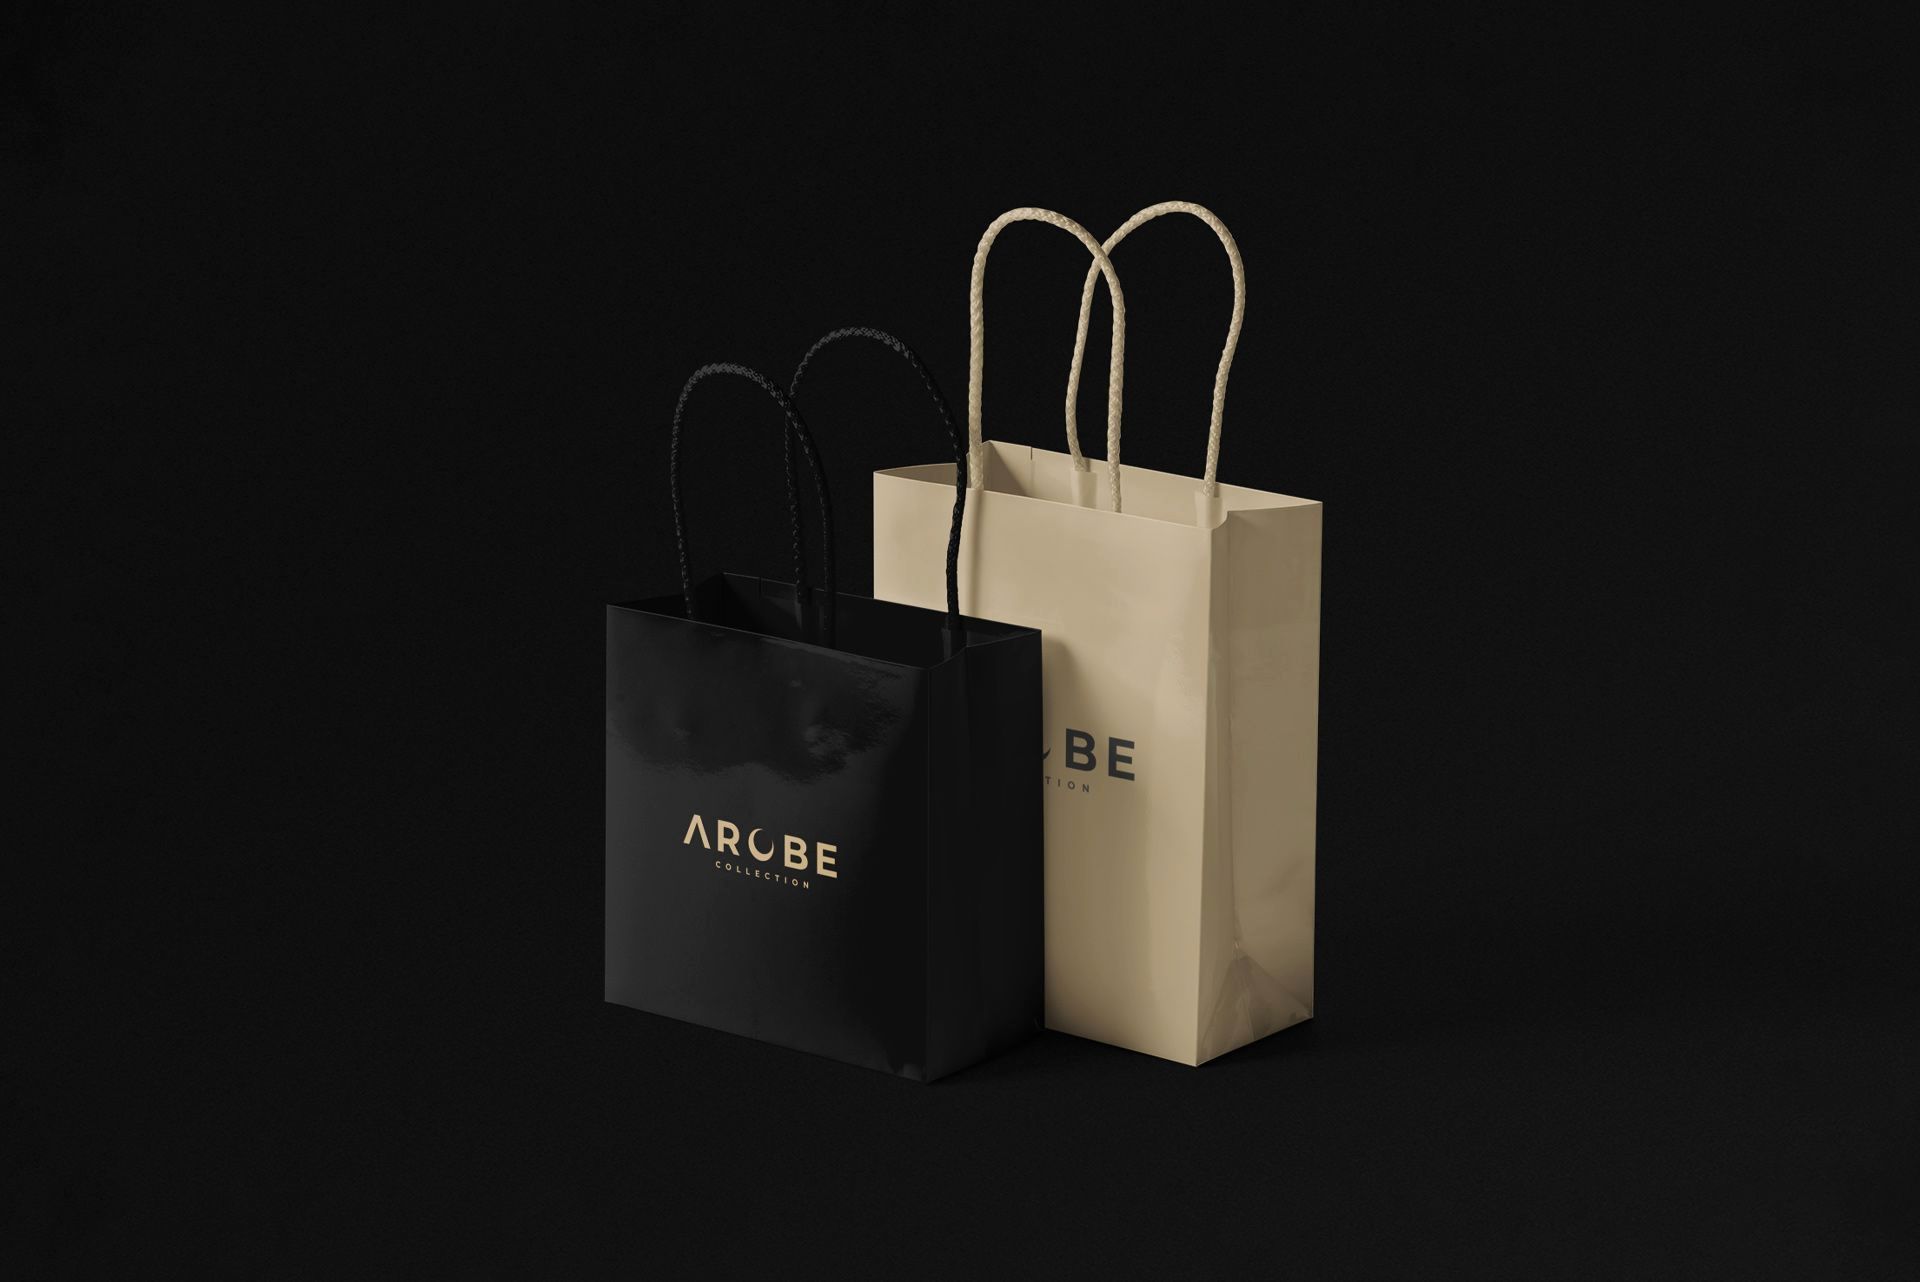 Arobe Collection product bag designs from Web mind agency Reading